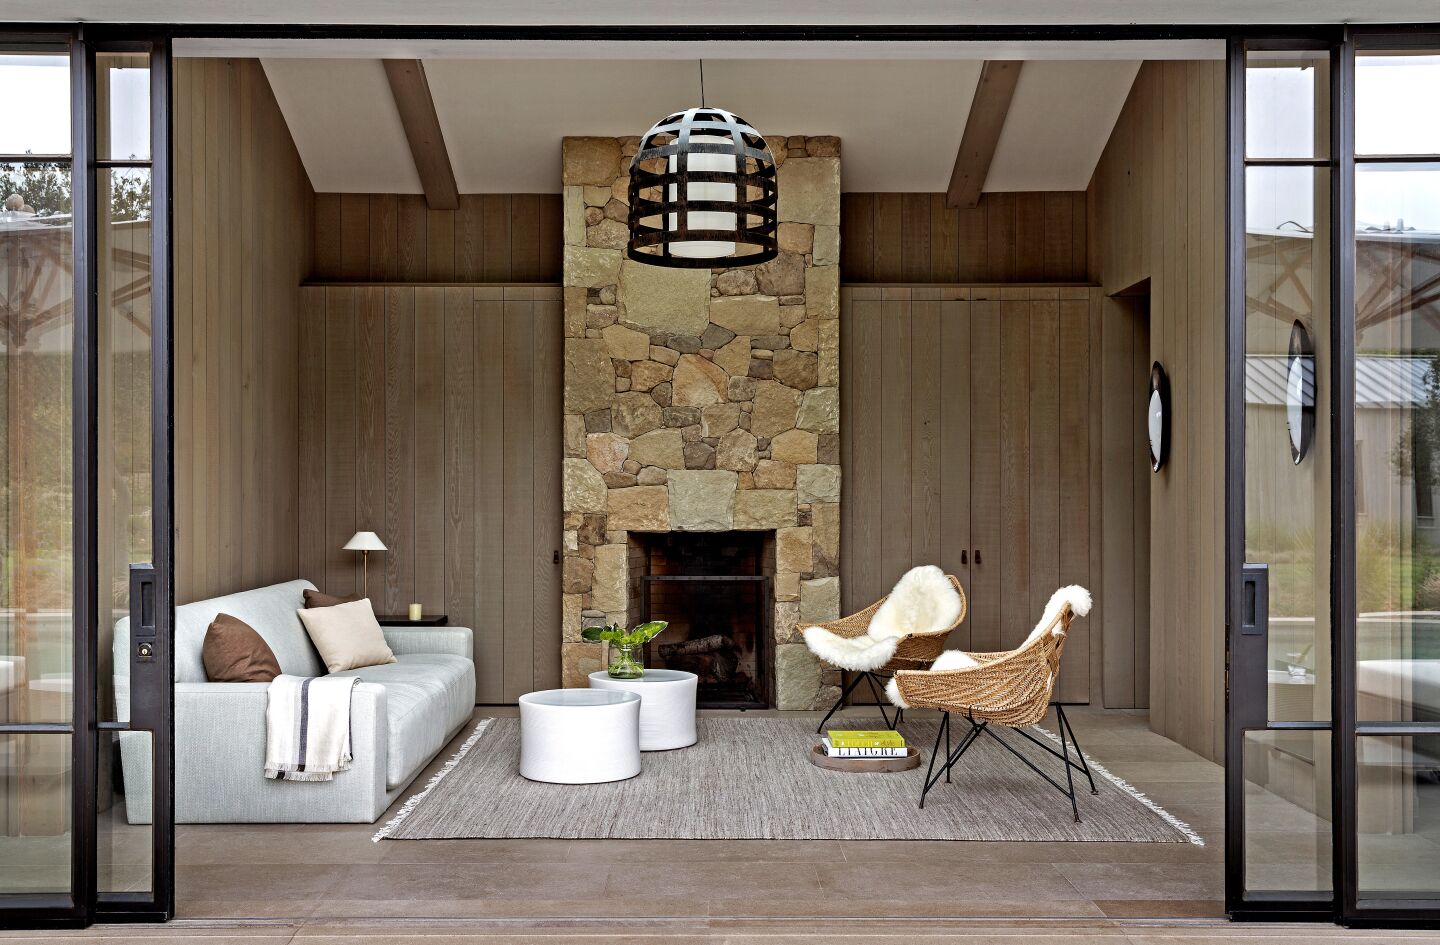 Romero Canyon in Montecito, Calif., was the realization of a more personal dream for architect William Hefner, one shared with his wife and longtime creative partner, Kazuko Hoshino, who died in April.